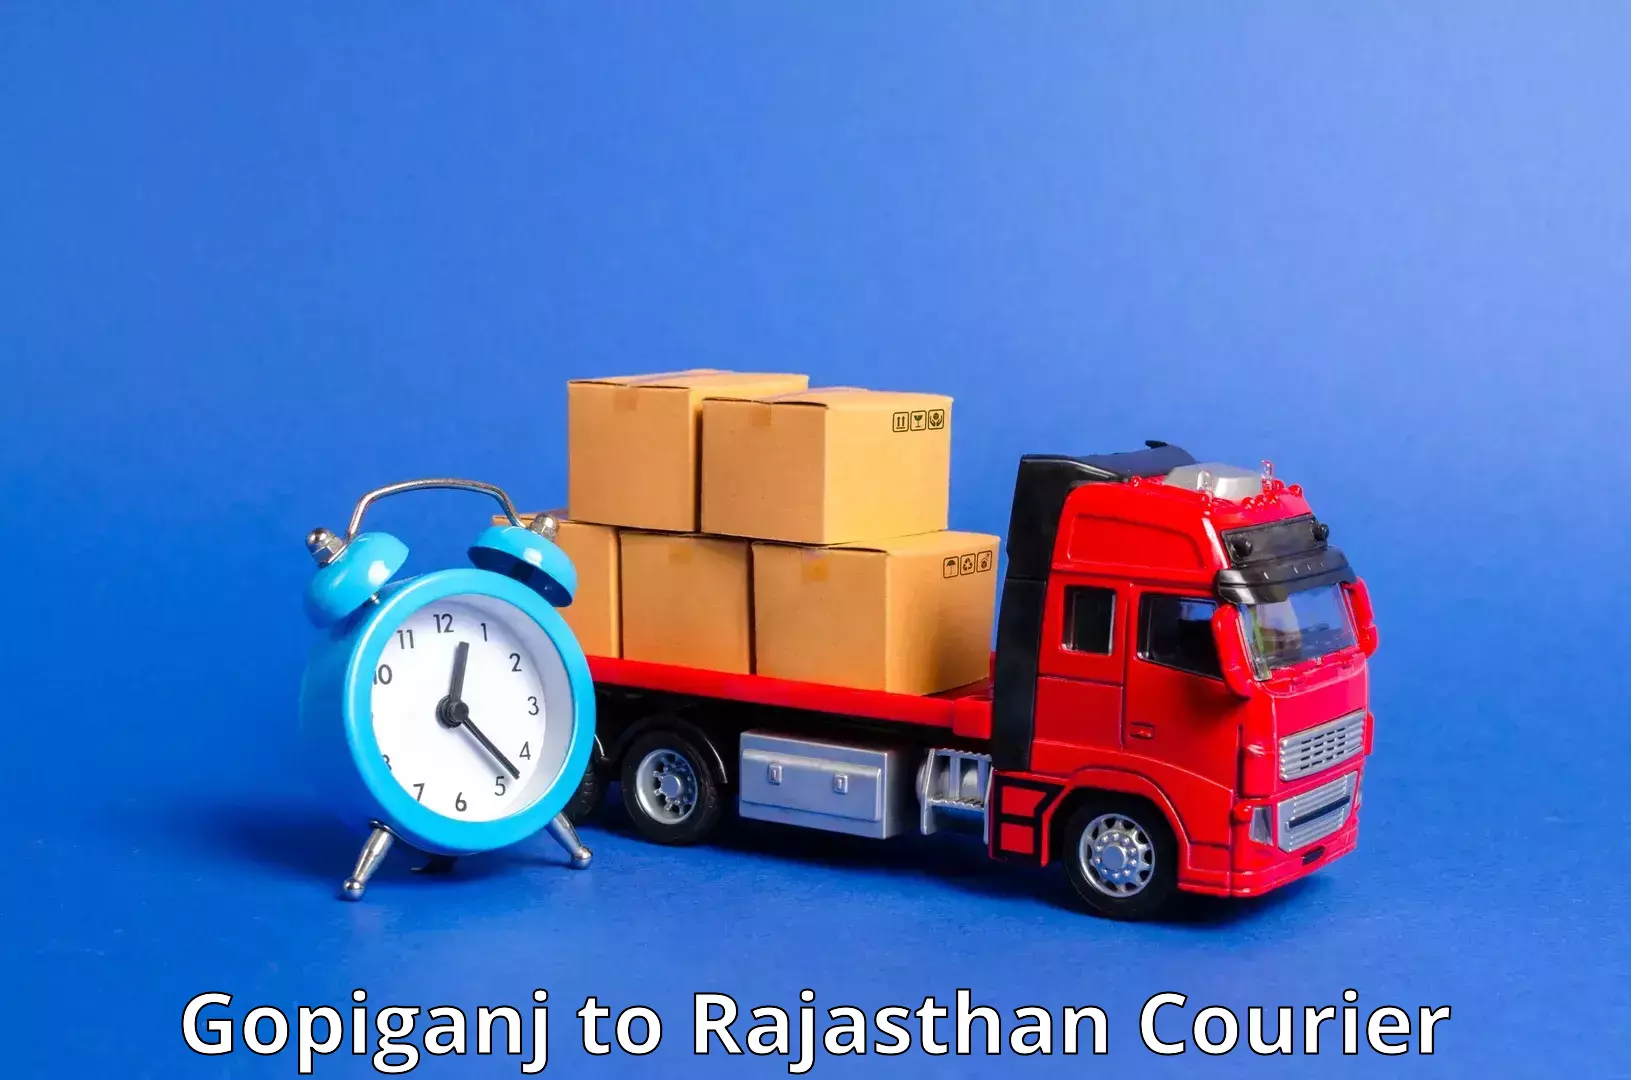 Reliable delivery network Gopiganj to Pilani